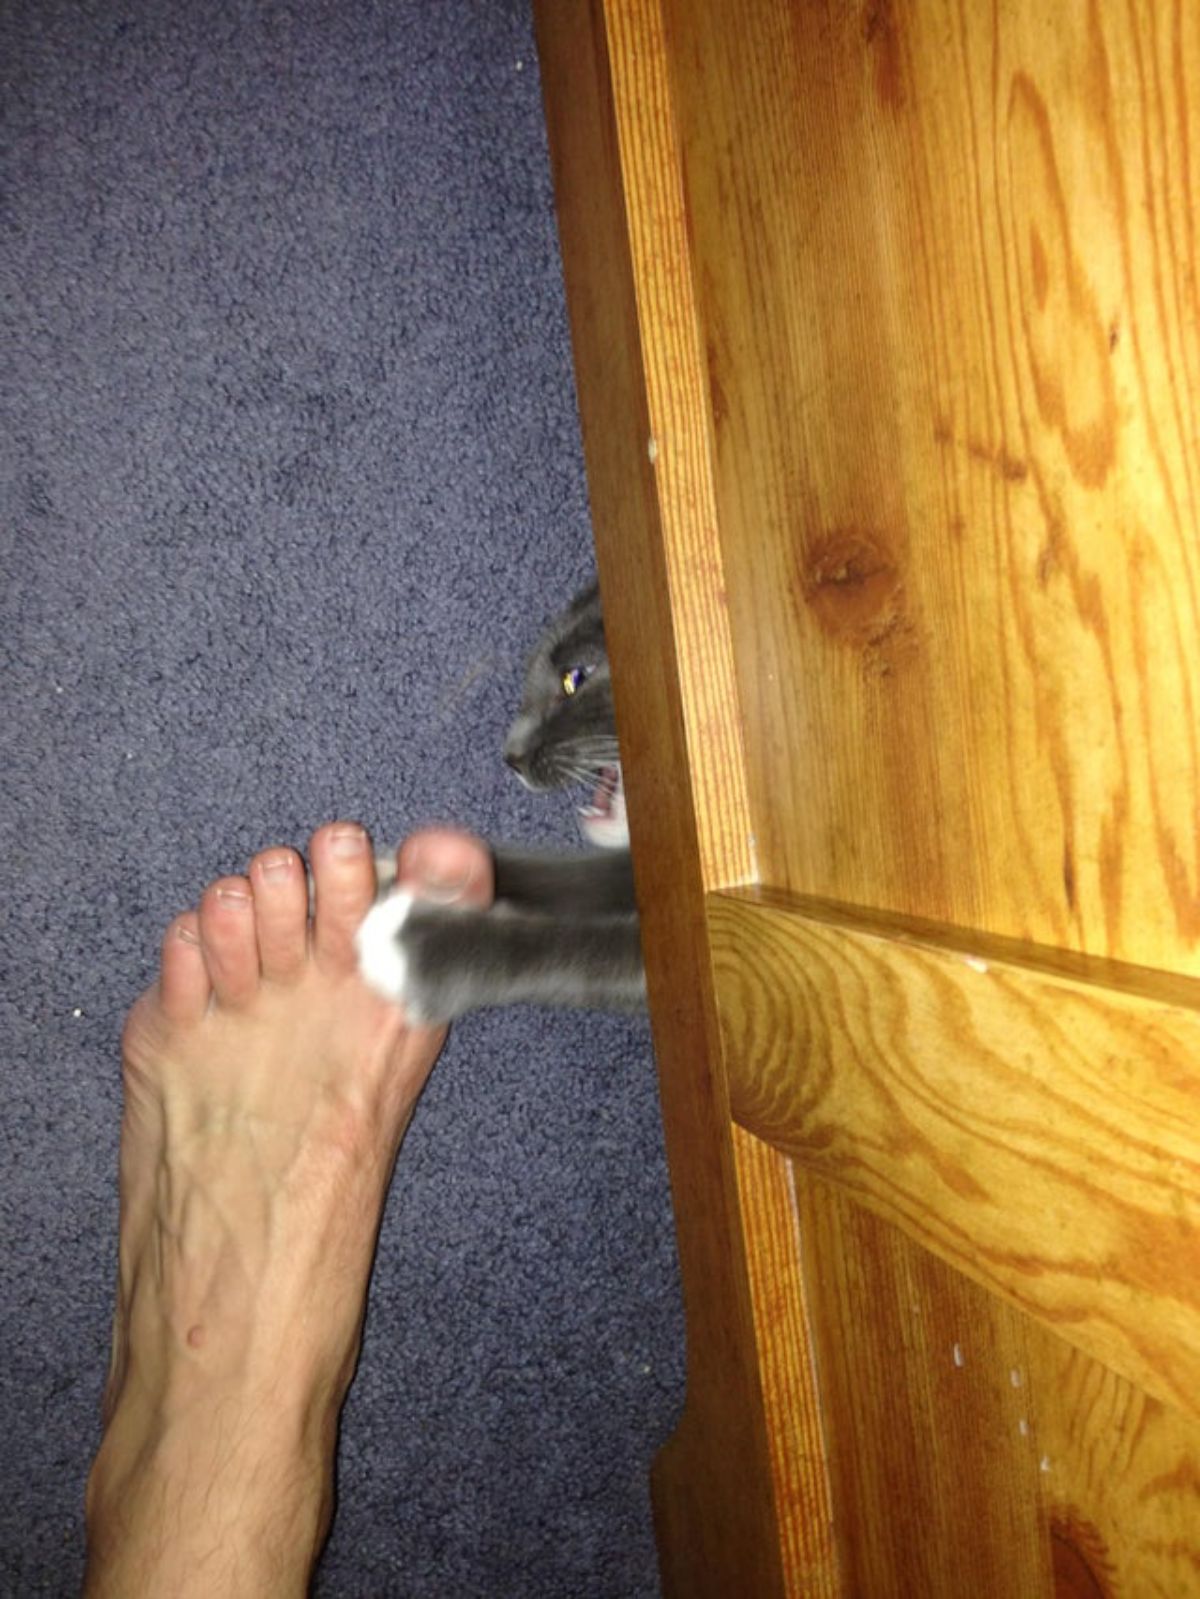 grey and white cat reaching out from under a brown cupboard to attack someone's foot